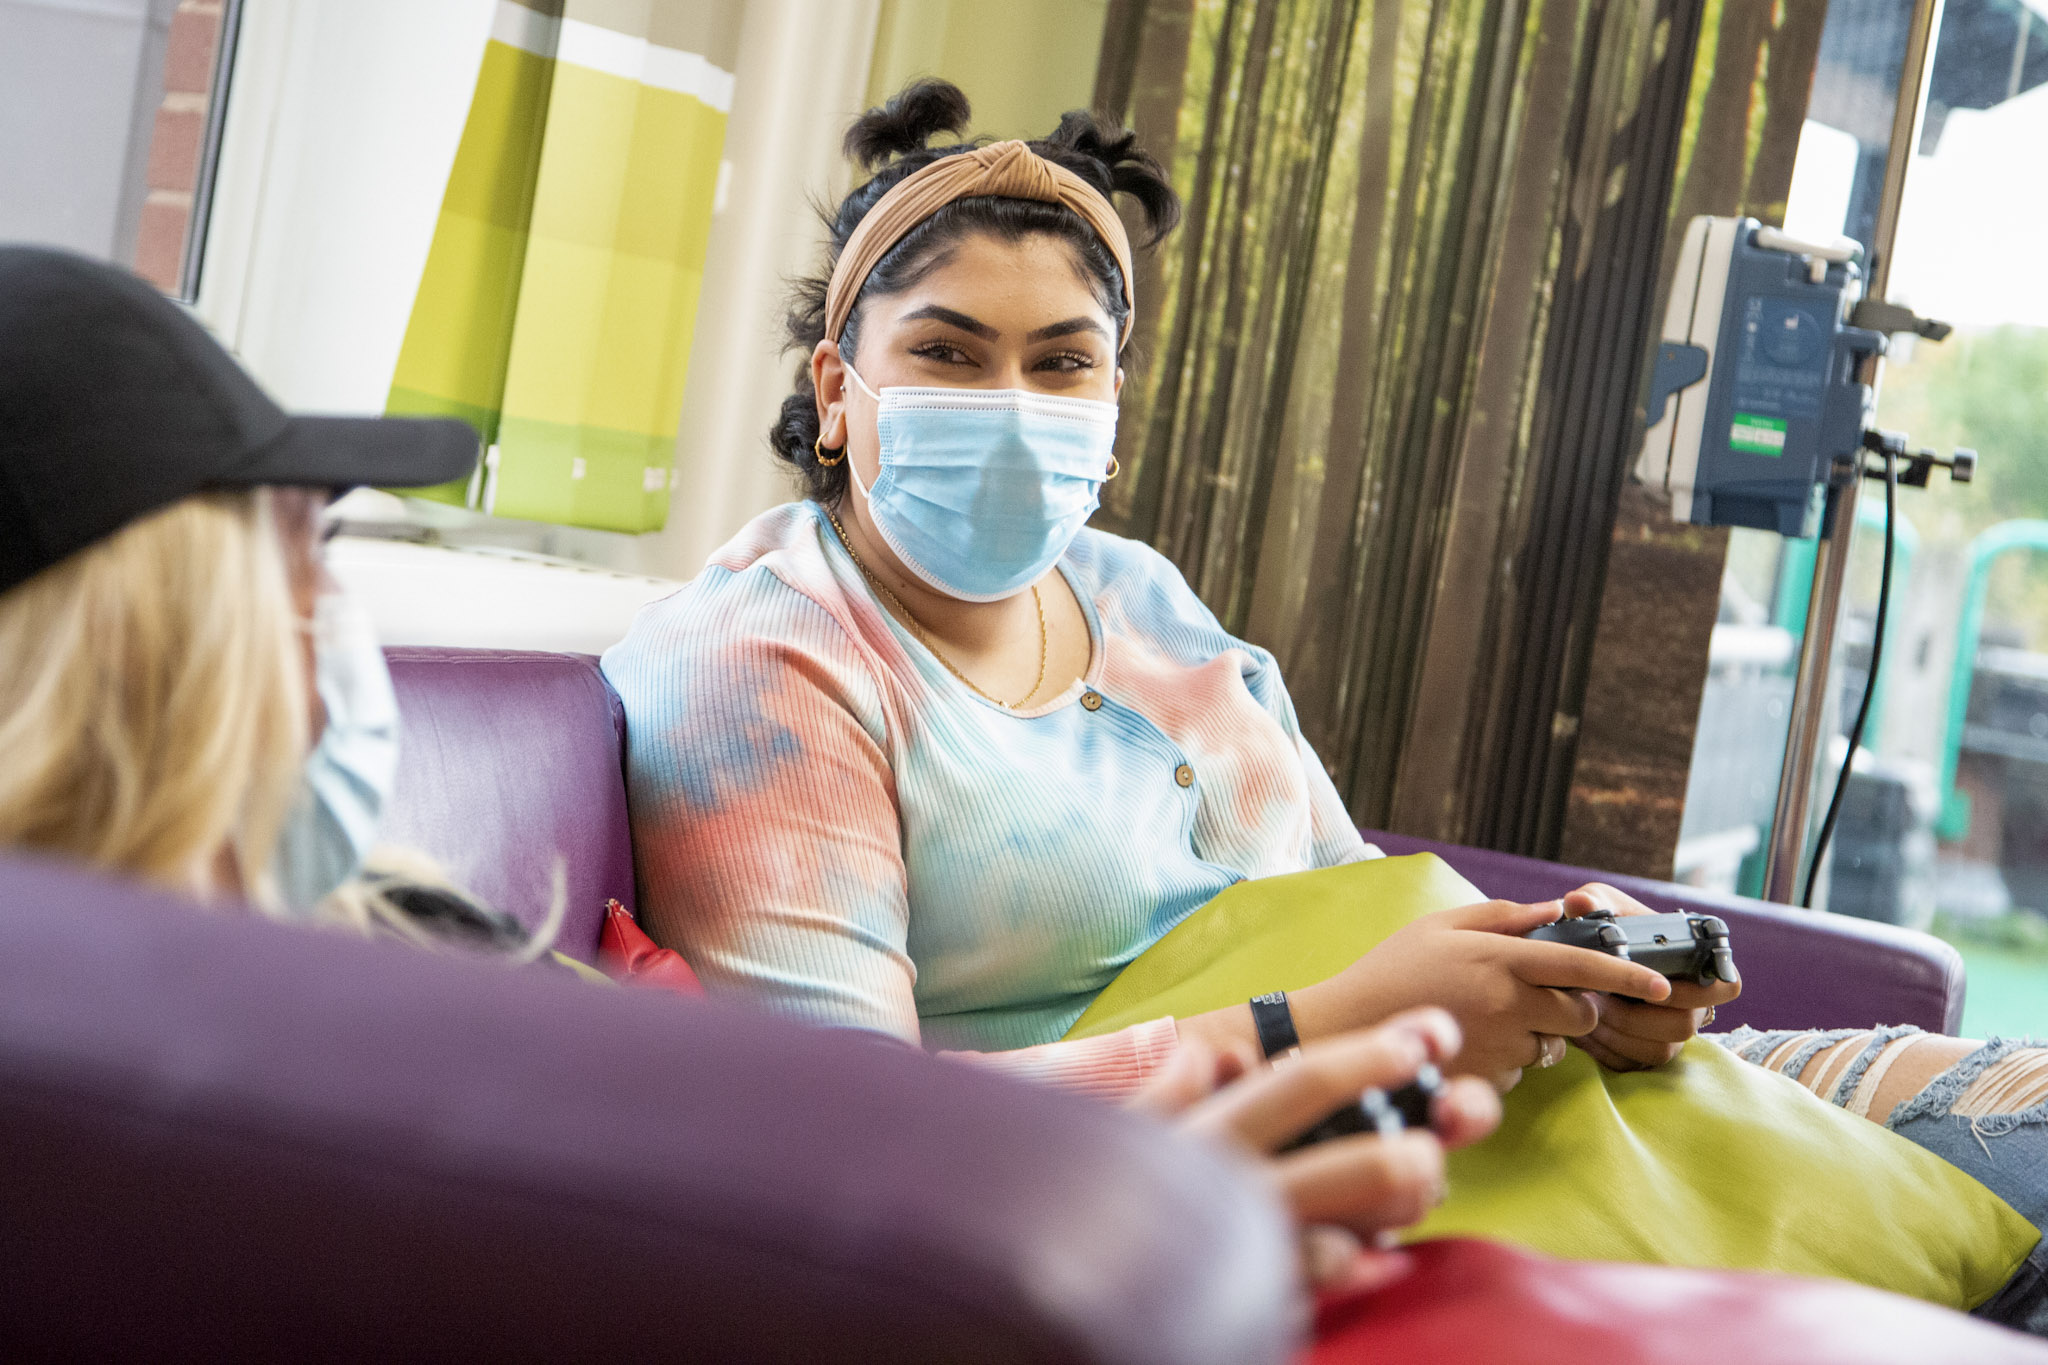 image of a teenage cancer patient playing video games while wearing a face mask